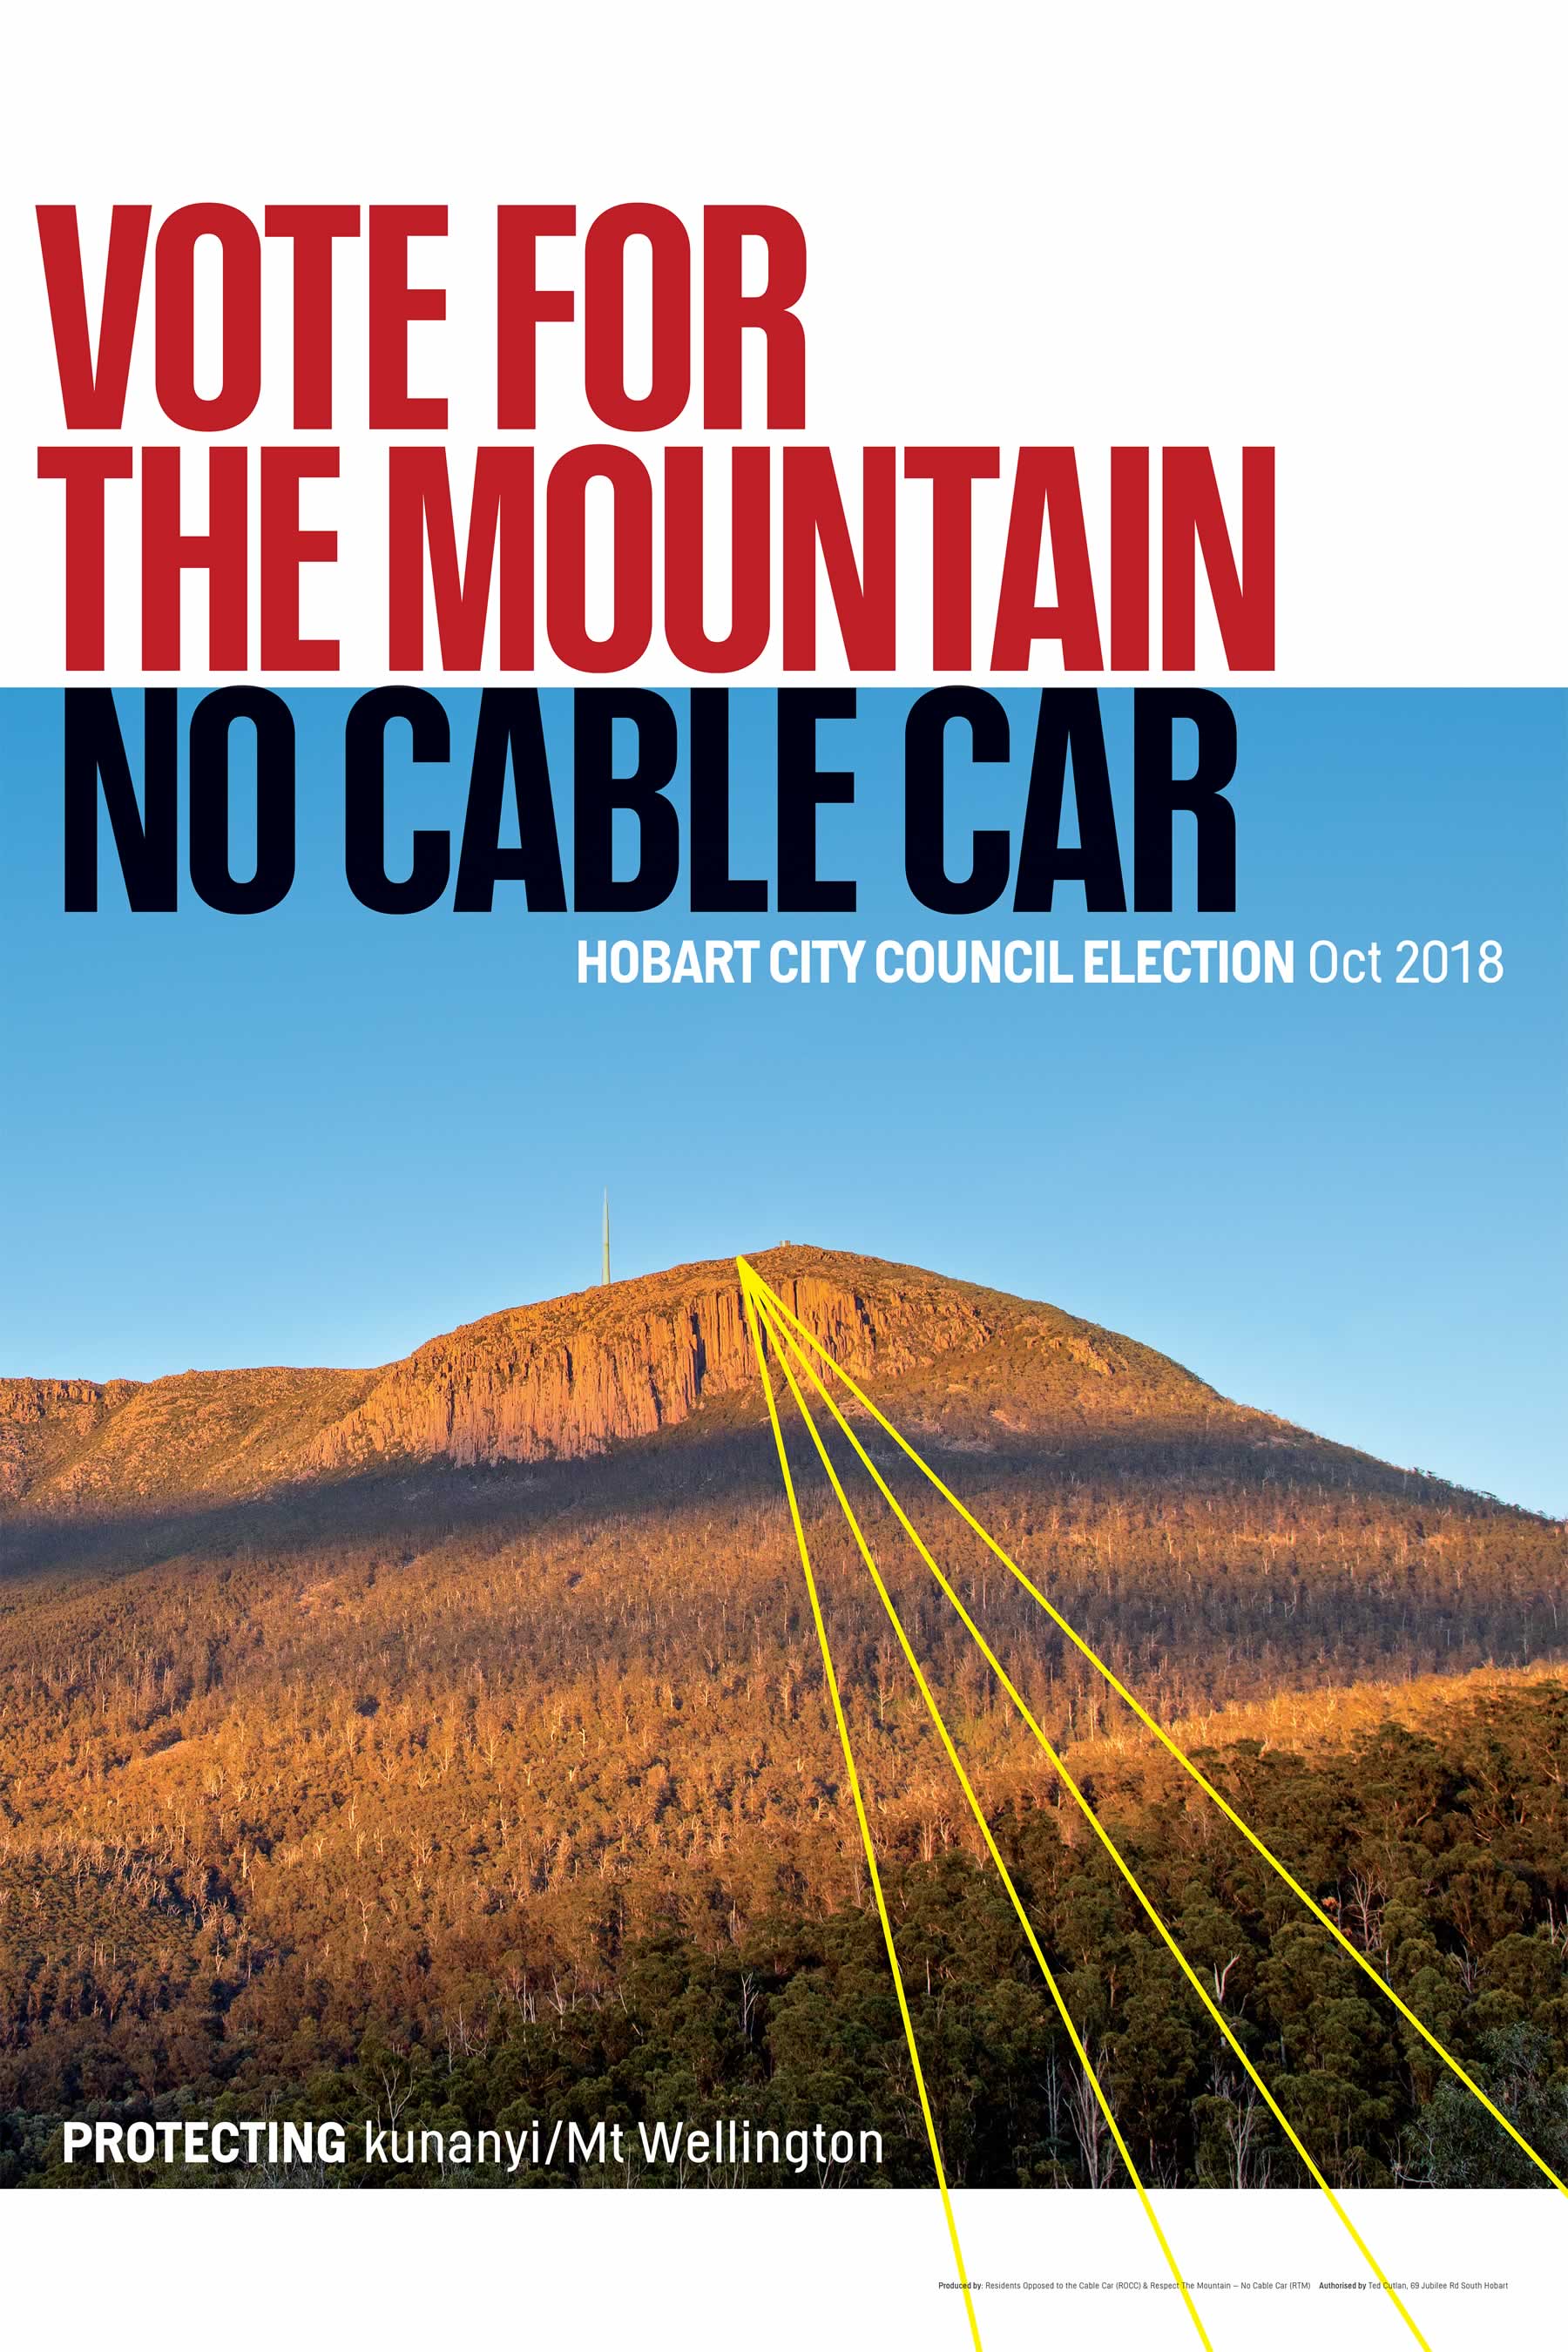 Image of campaign poster for the Hobart City Council Election in October 2018, with the words “Vote for the Mountain, No Cable Car”, “protecting kunanyi/Mt Wellington” over a photo of the mountain featuring the organ pipes and with graphic lines indicating the cables.